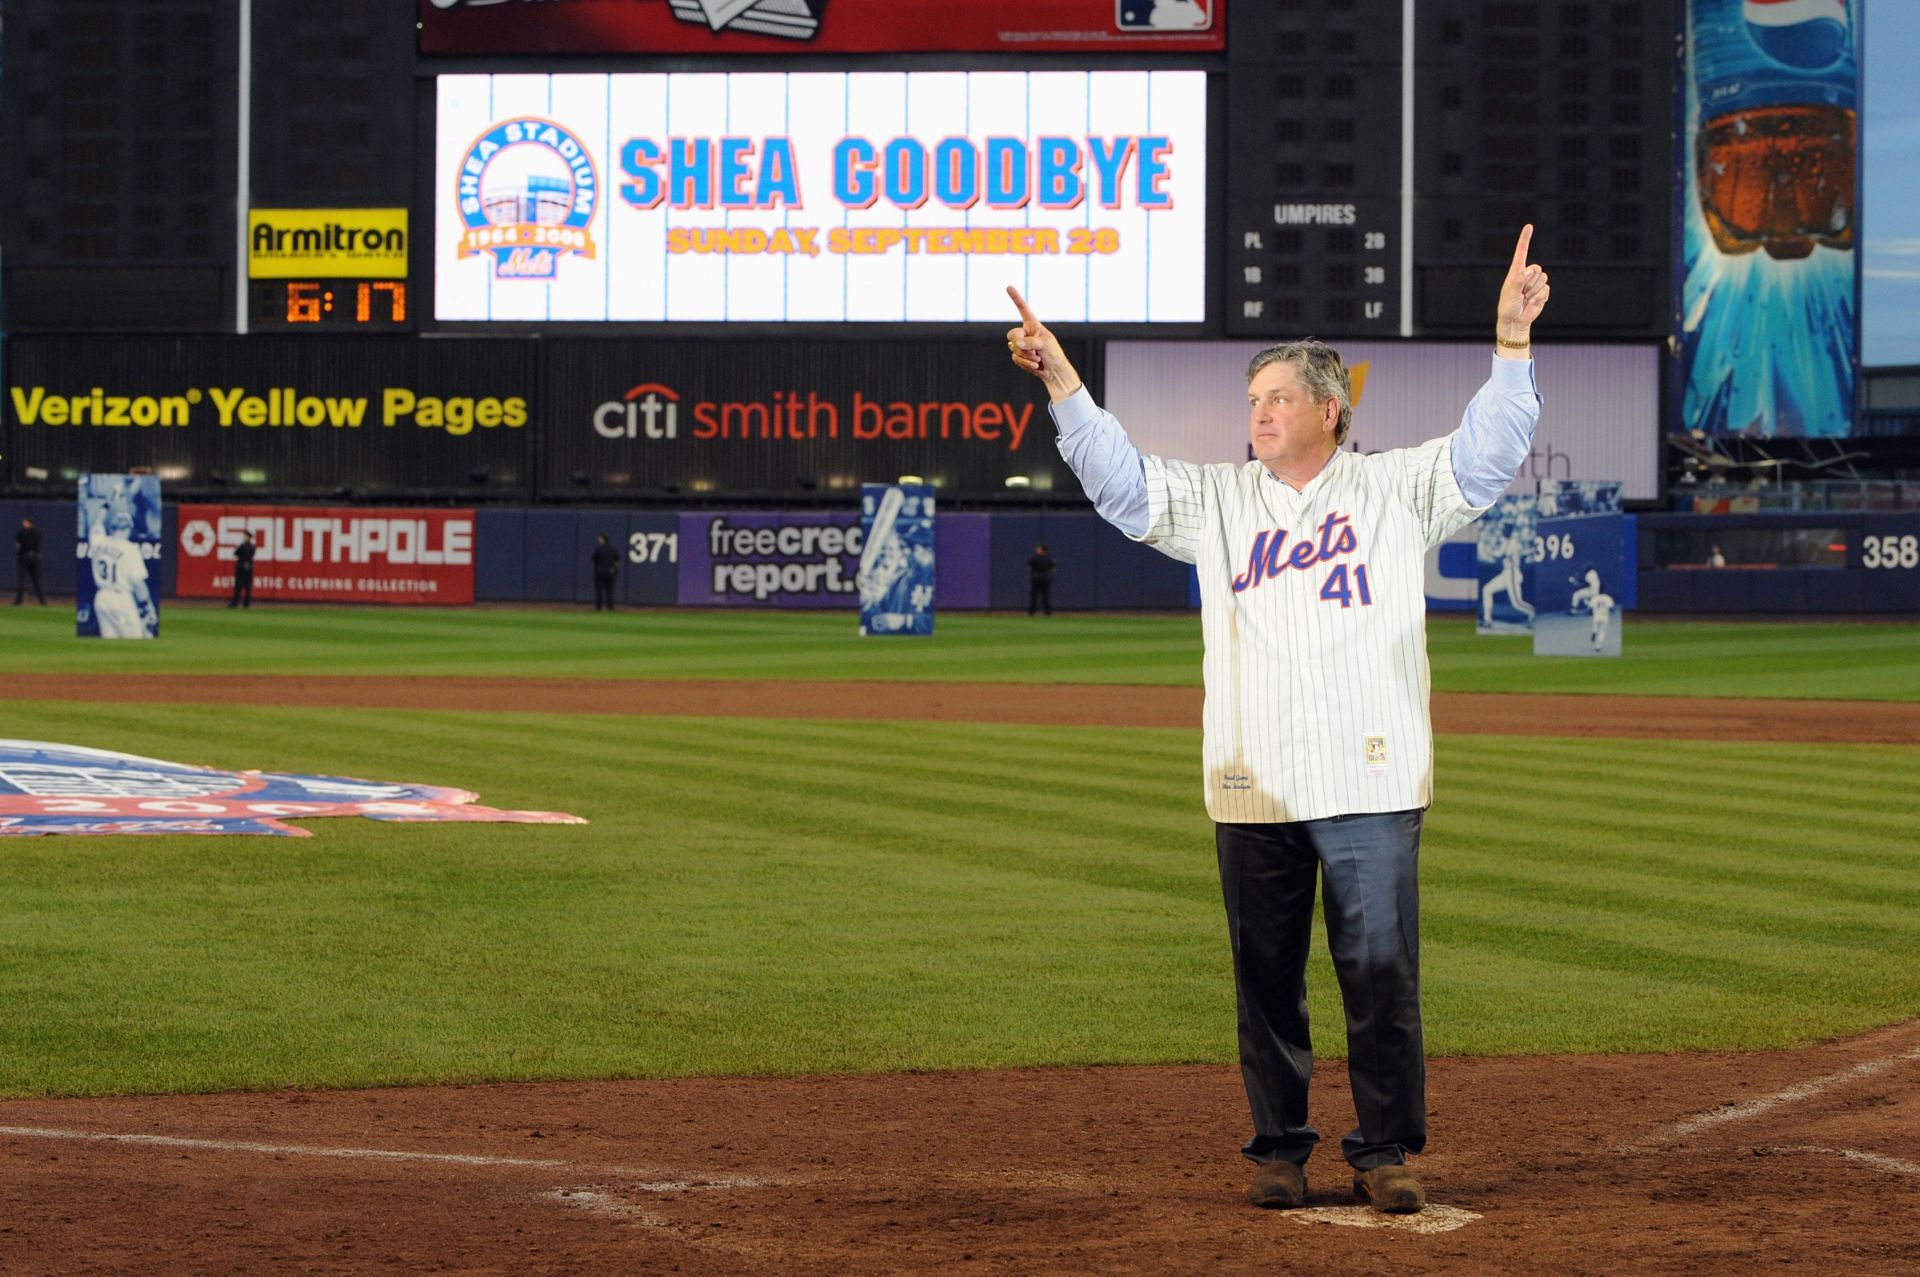 Tom Seaver in the final ever New York Mets home game at Shea Stadium